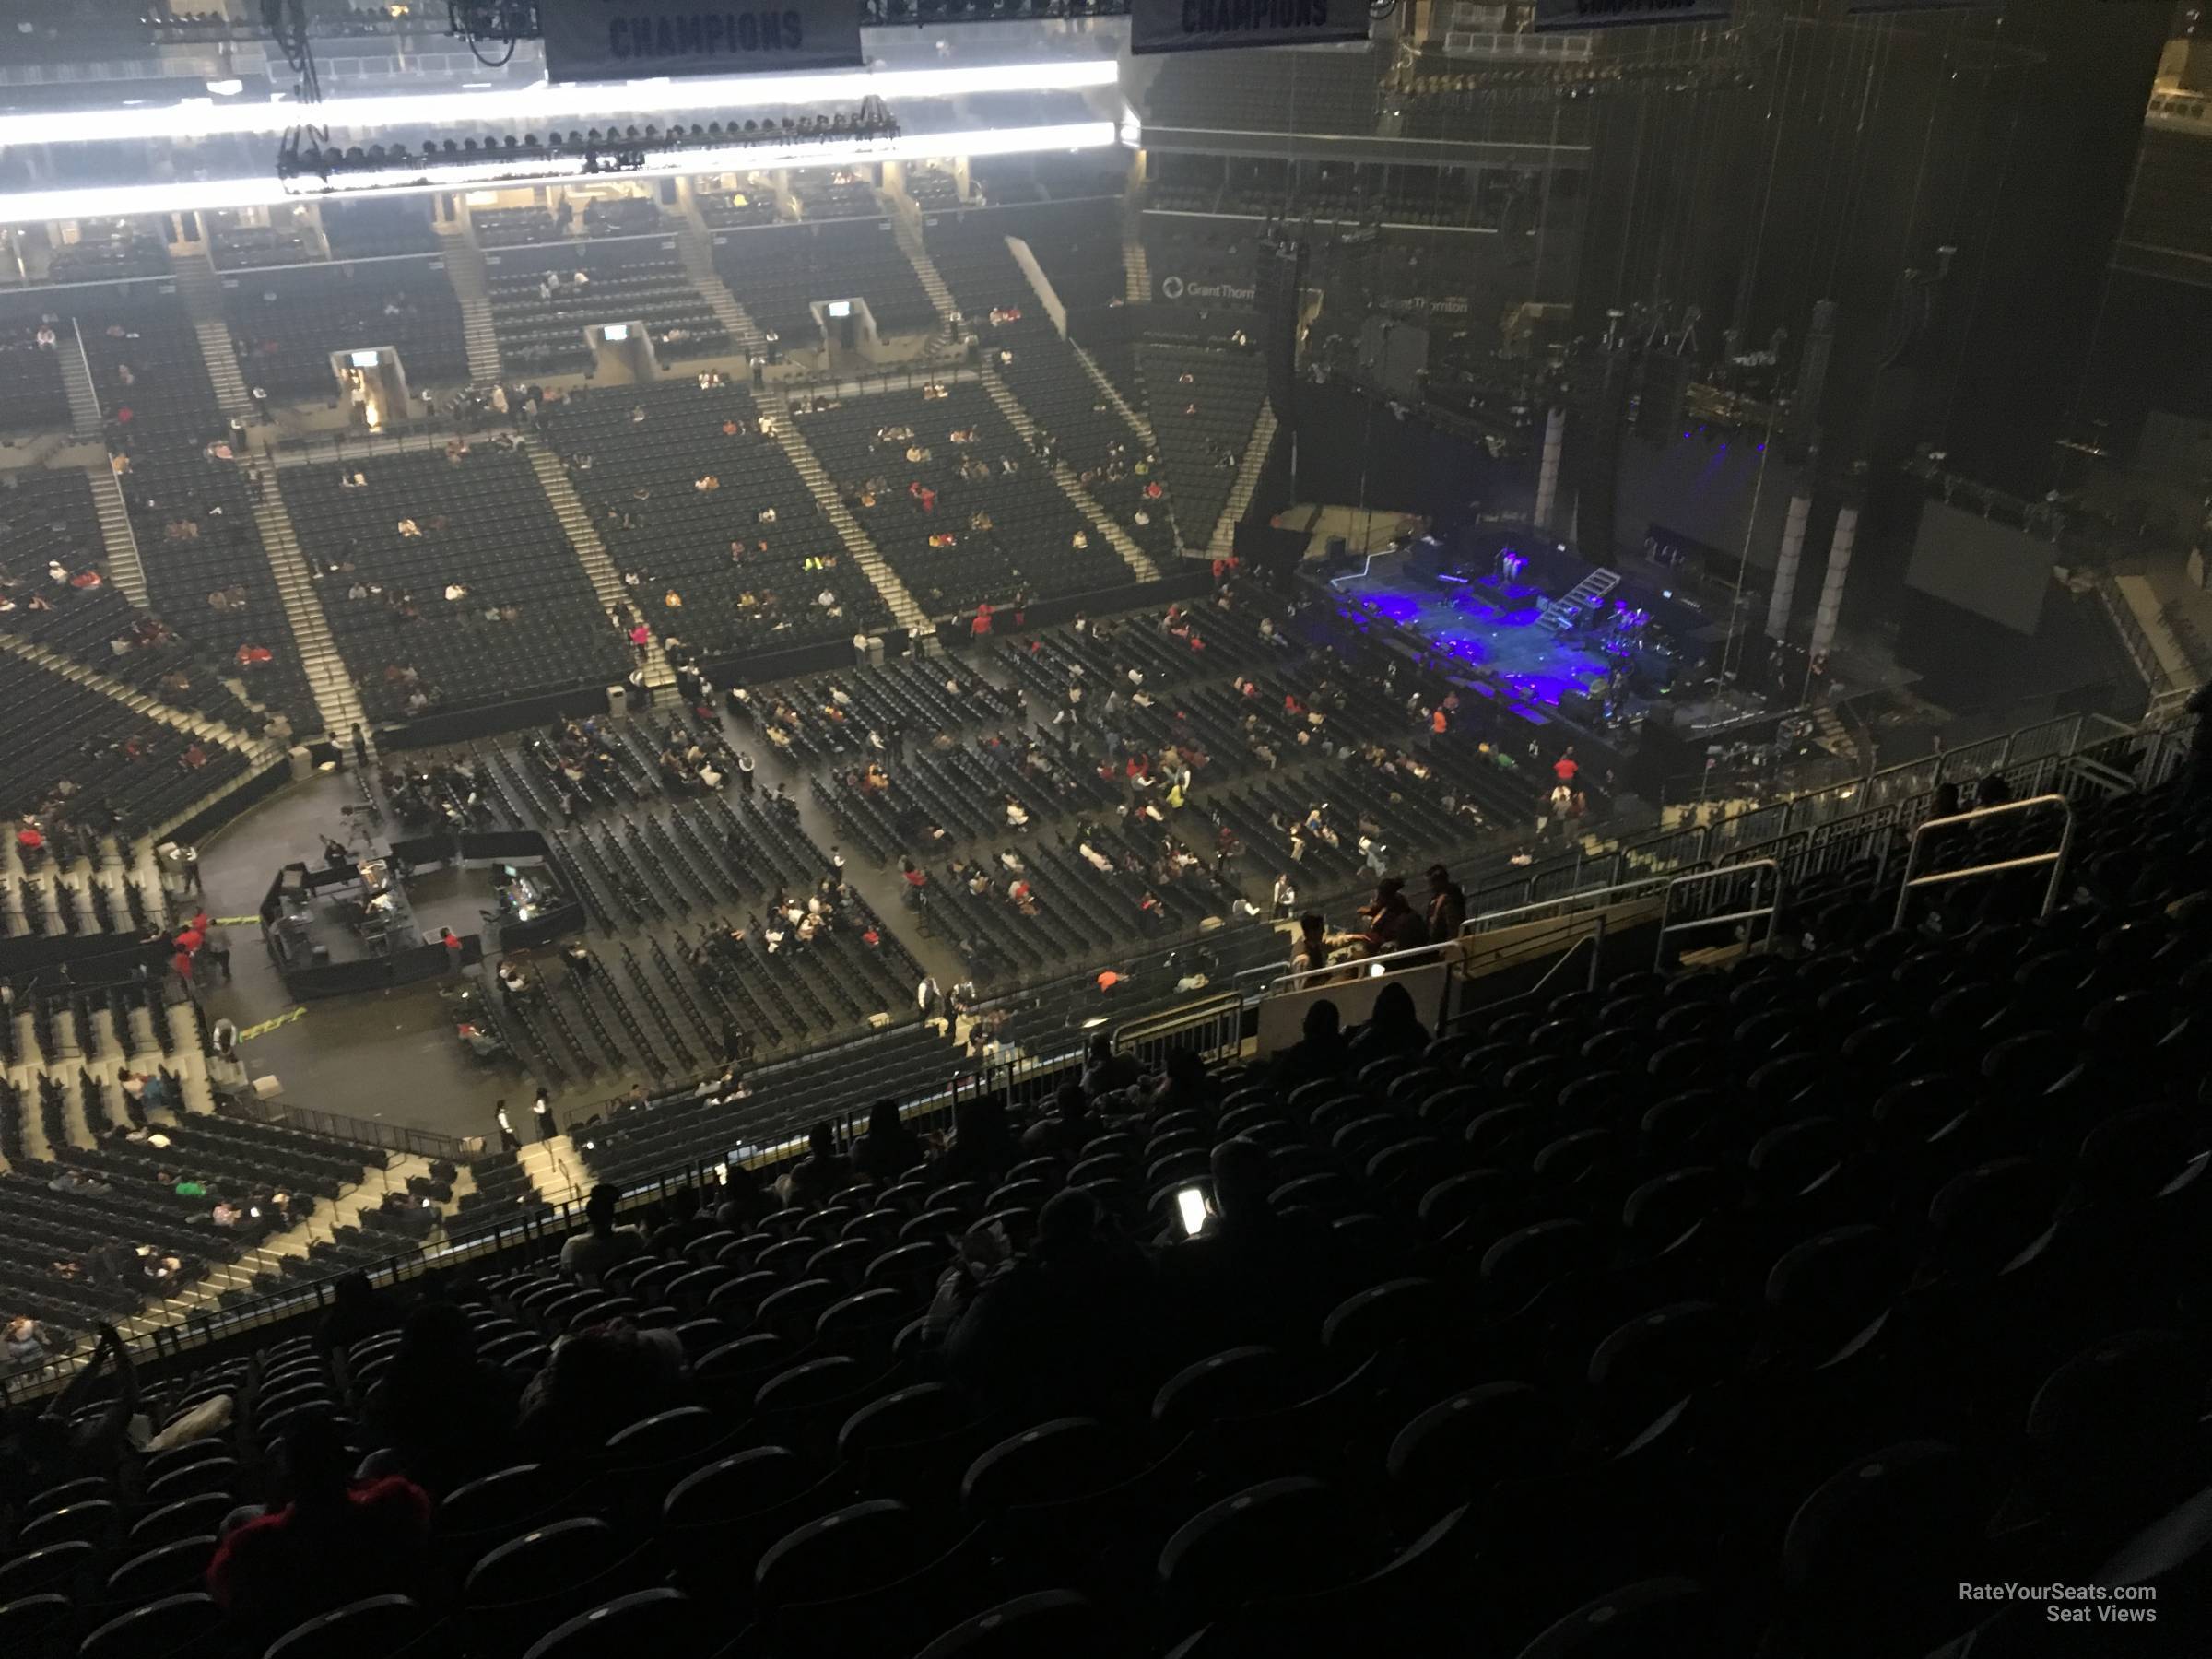 Section 210 at Barclays Center for Concerts - RateYourSeats.com